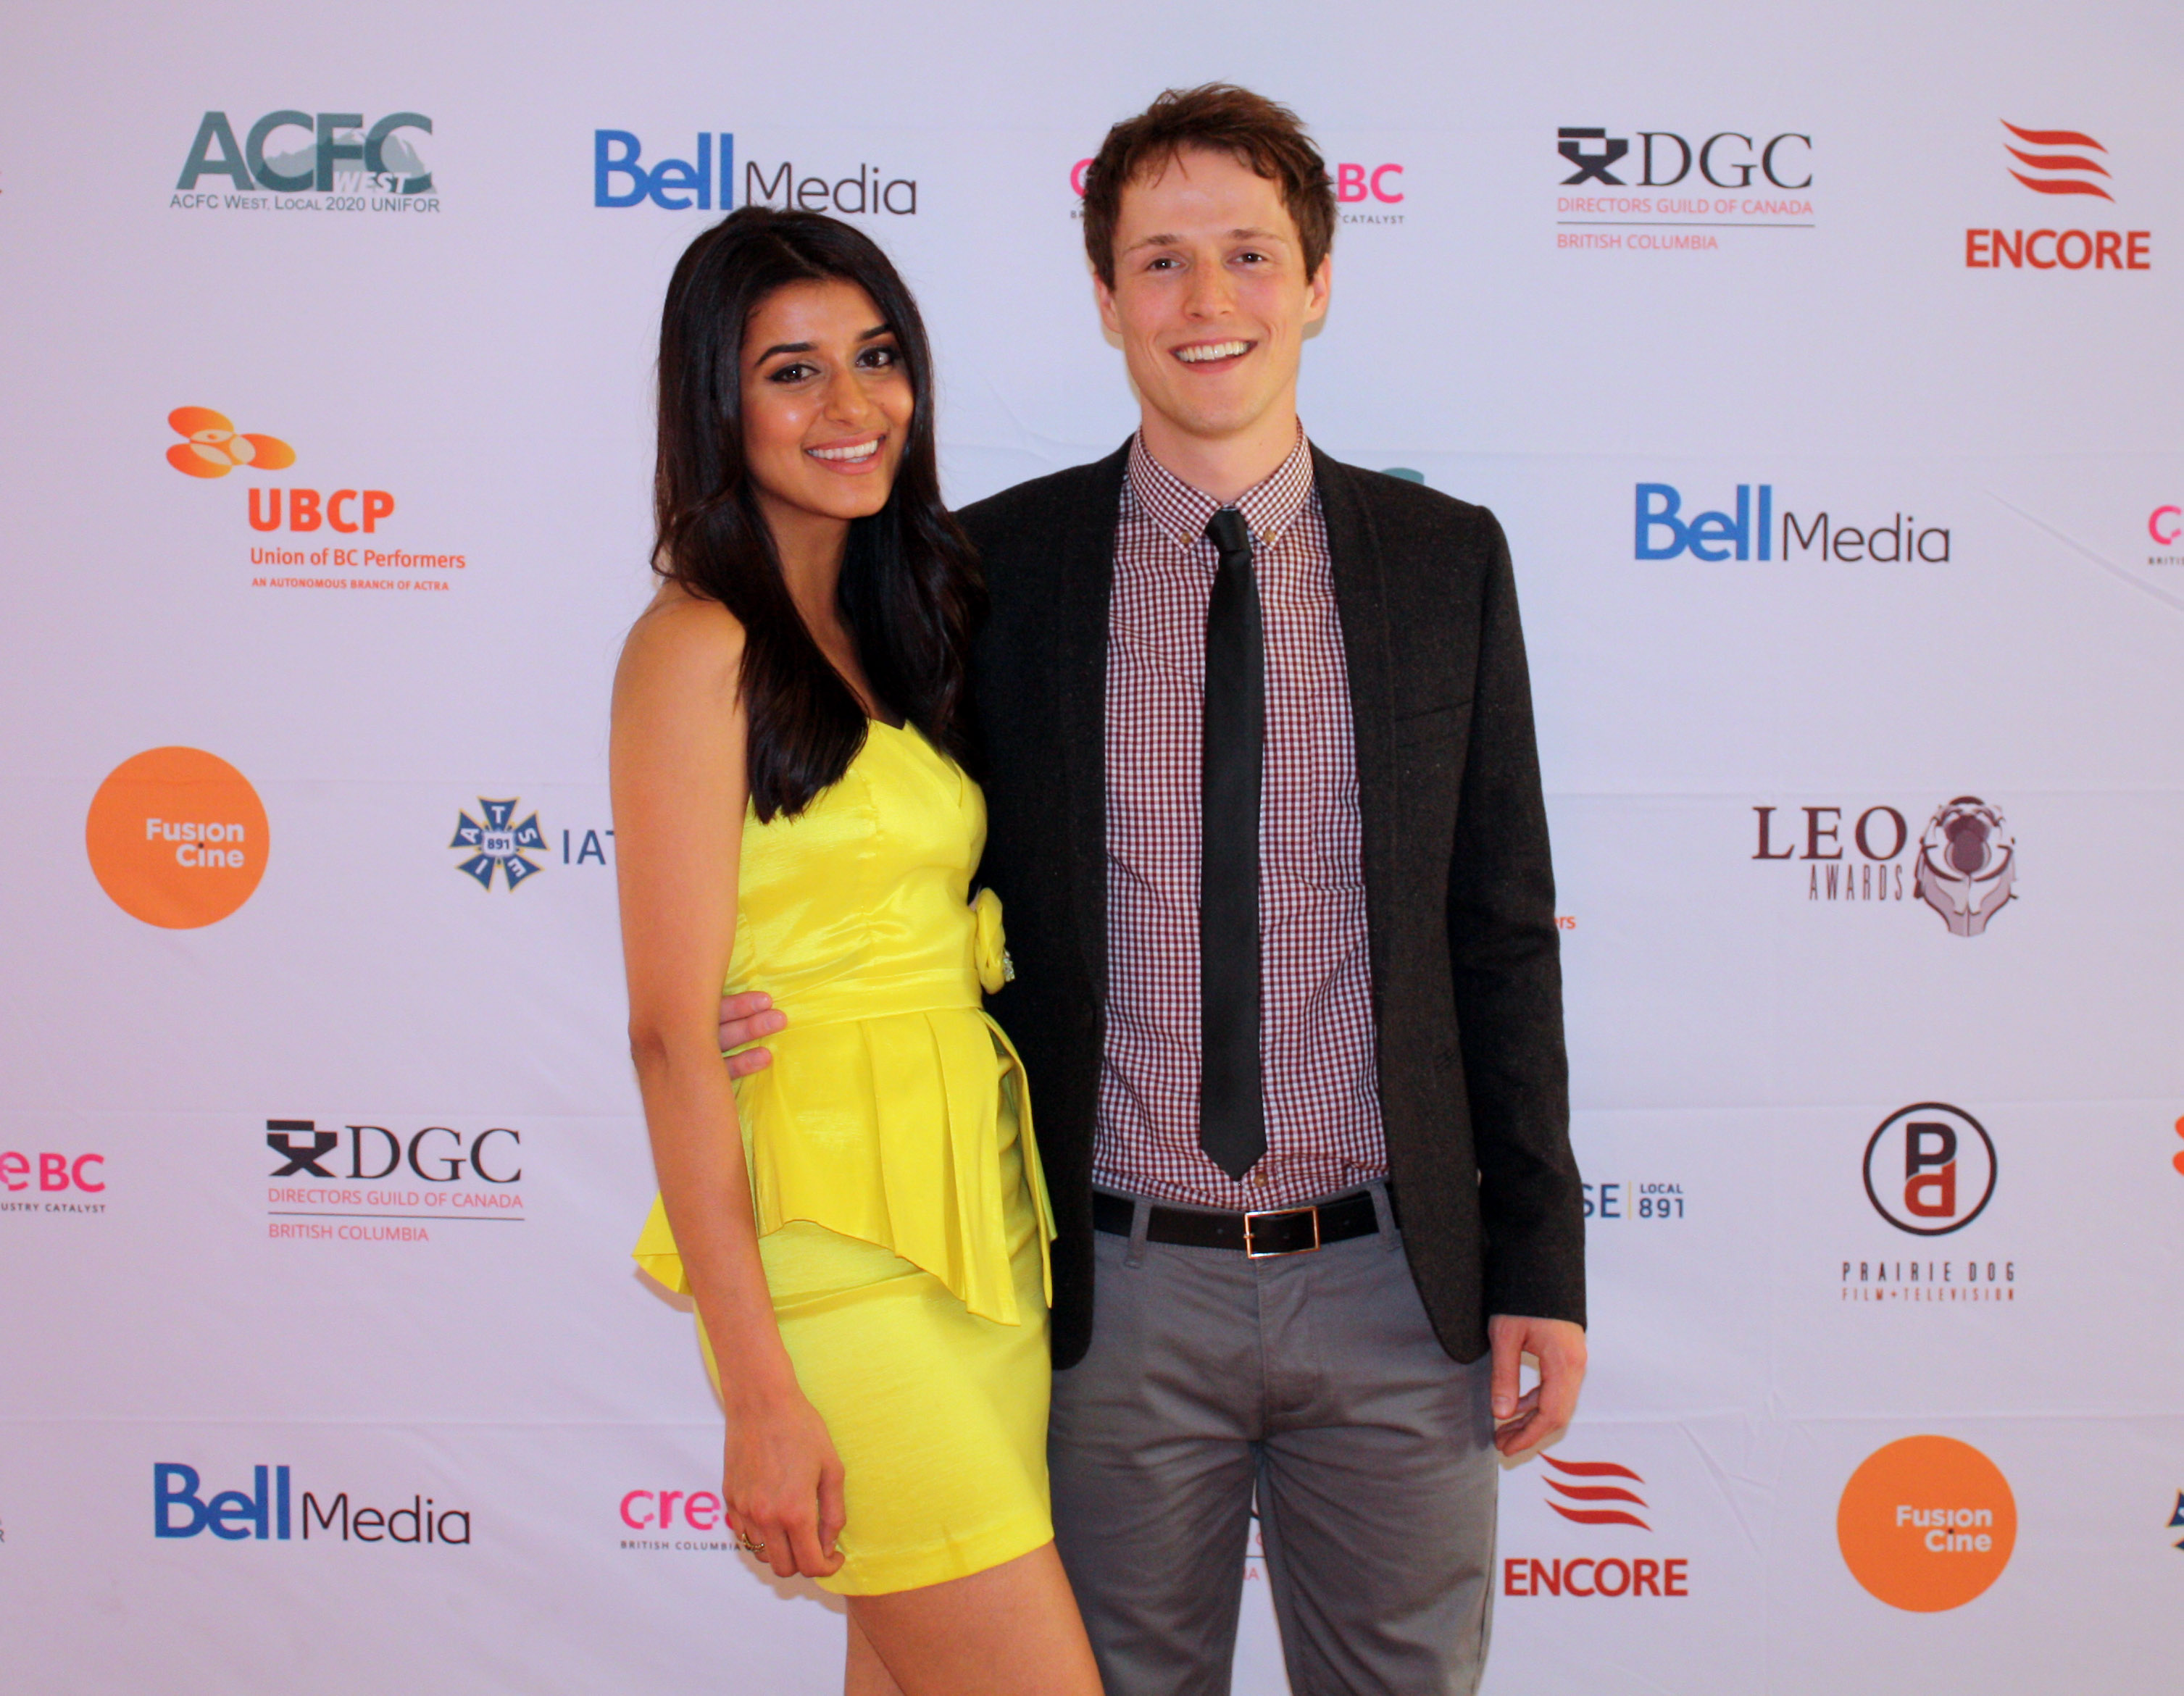 Actress Sandy Sidhu and Composer Andrew Halliwell